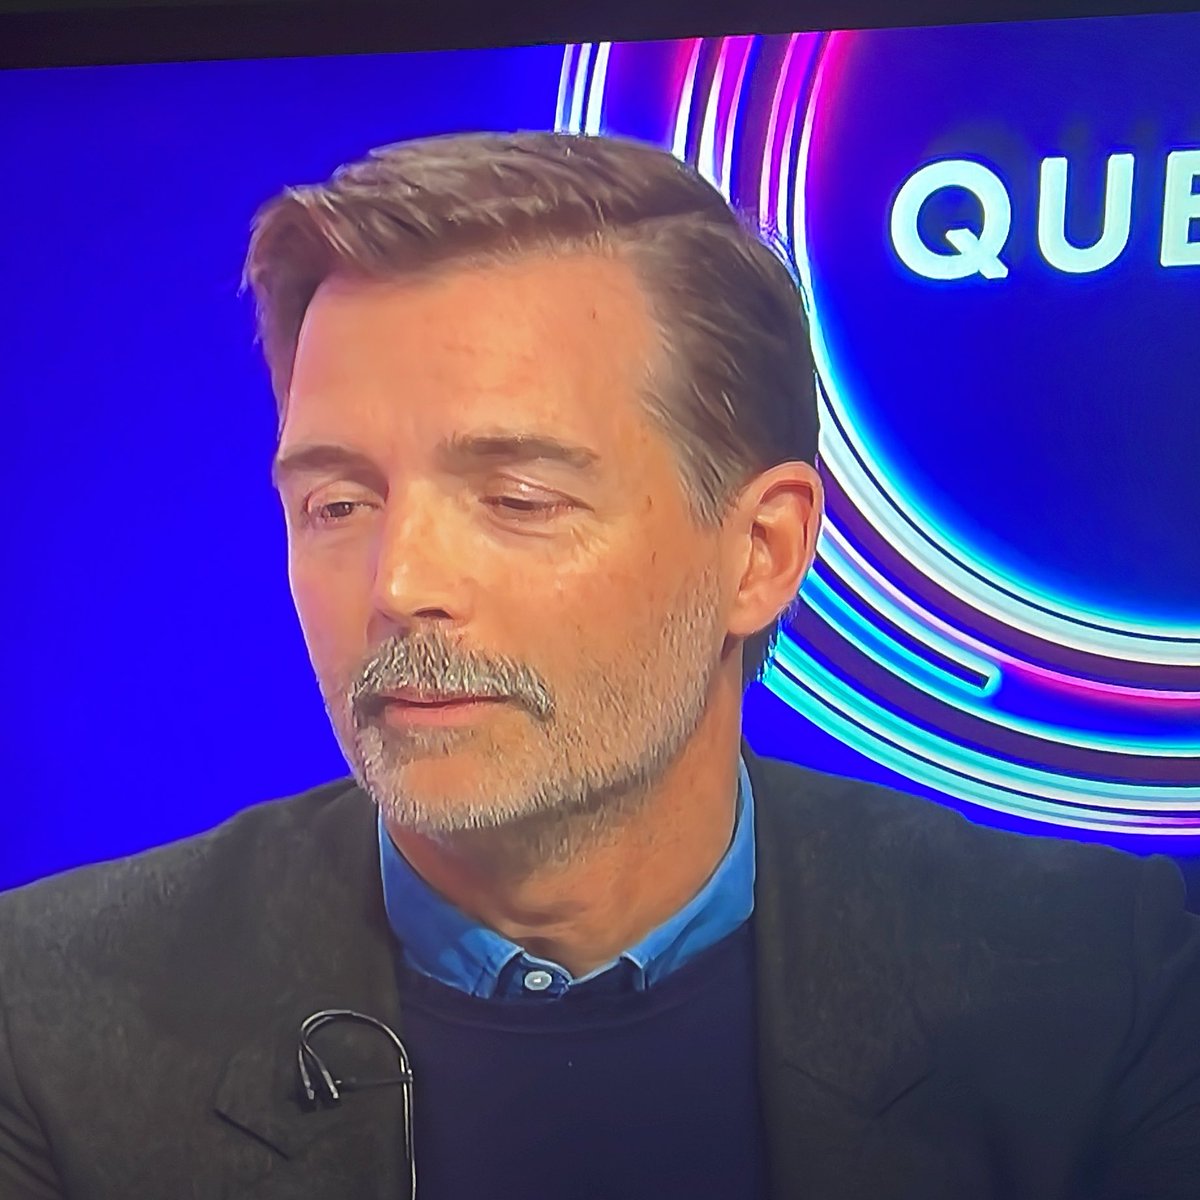 Patrick Grant has been one of the best guests they’ve had on @bbcquestiontime for quite some time #bbcqt